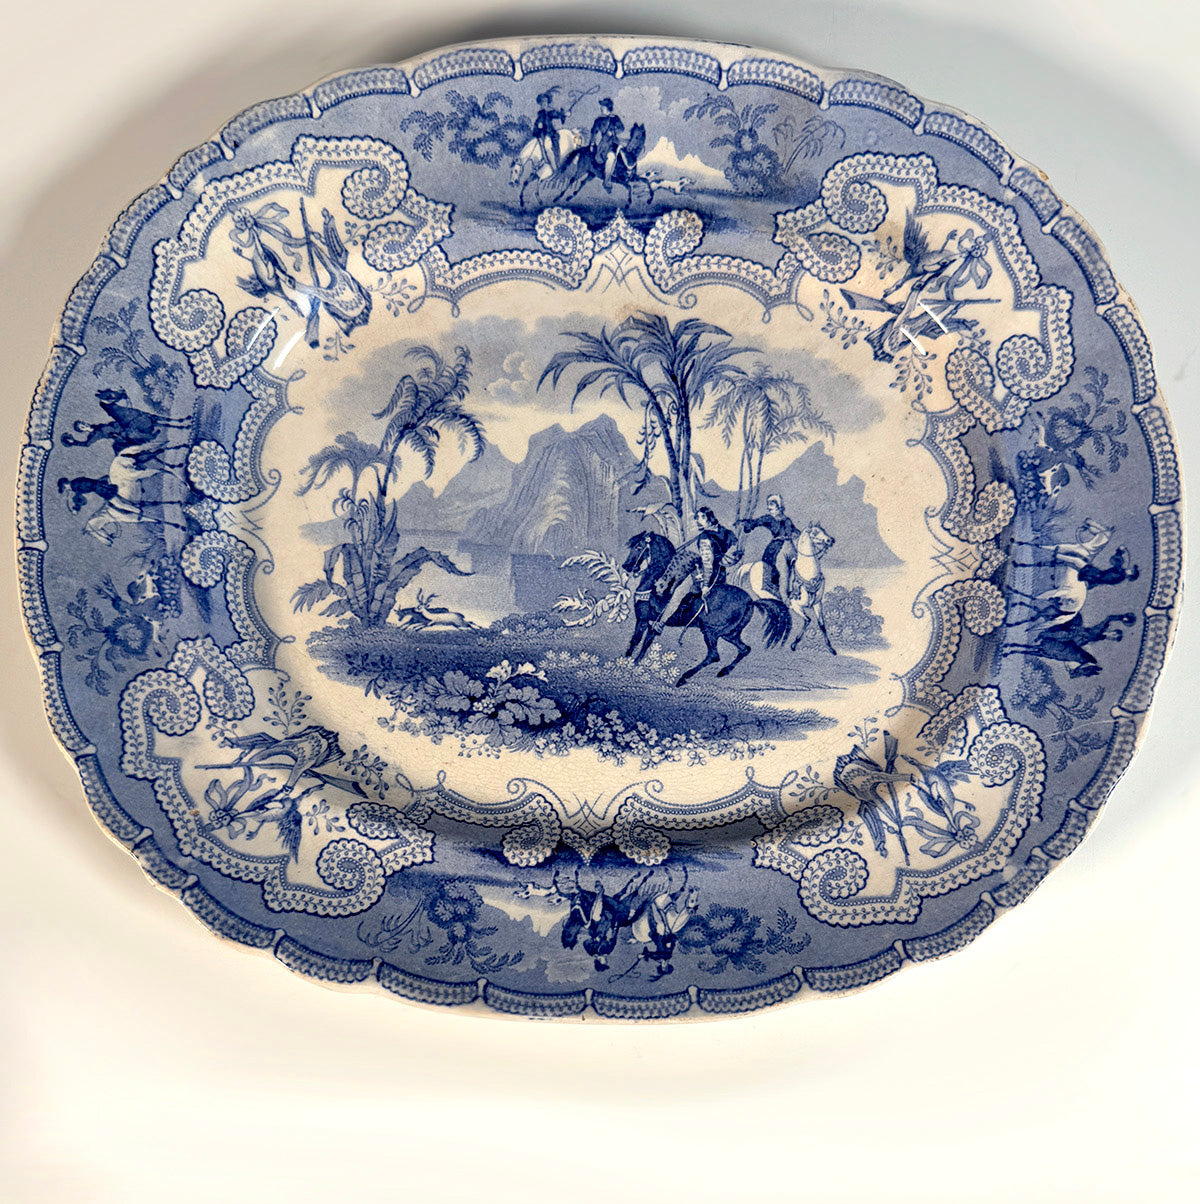 Antique Victorian Blue Transferware Platter, EW&S Chevy Chase, Hunt Theme with Horses, Game